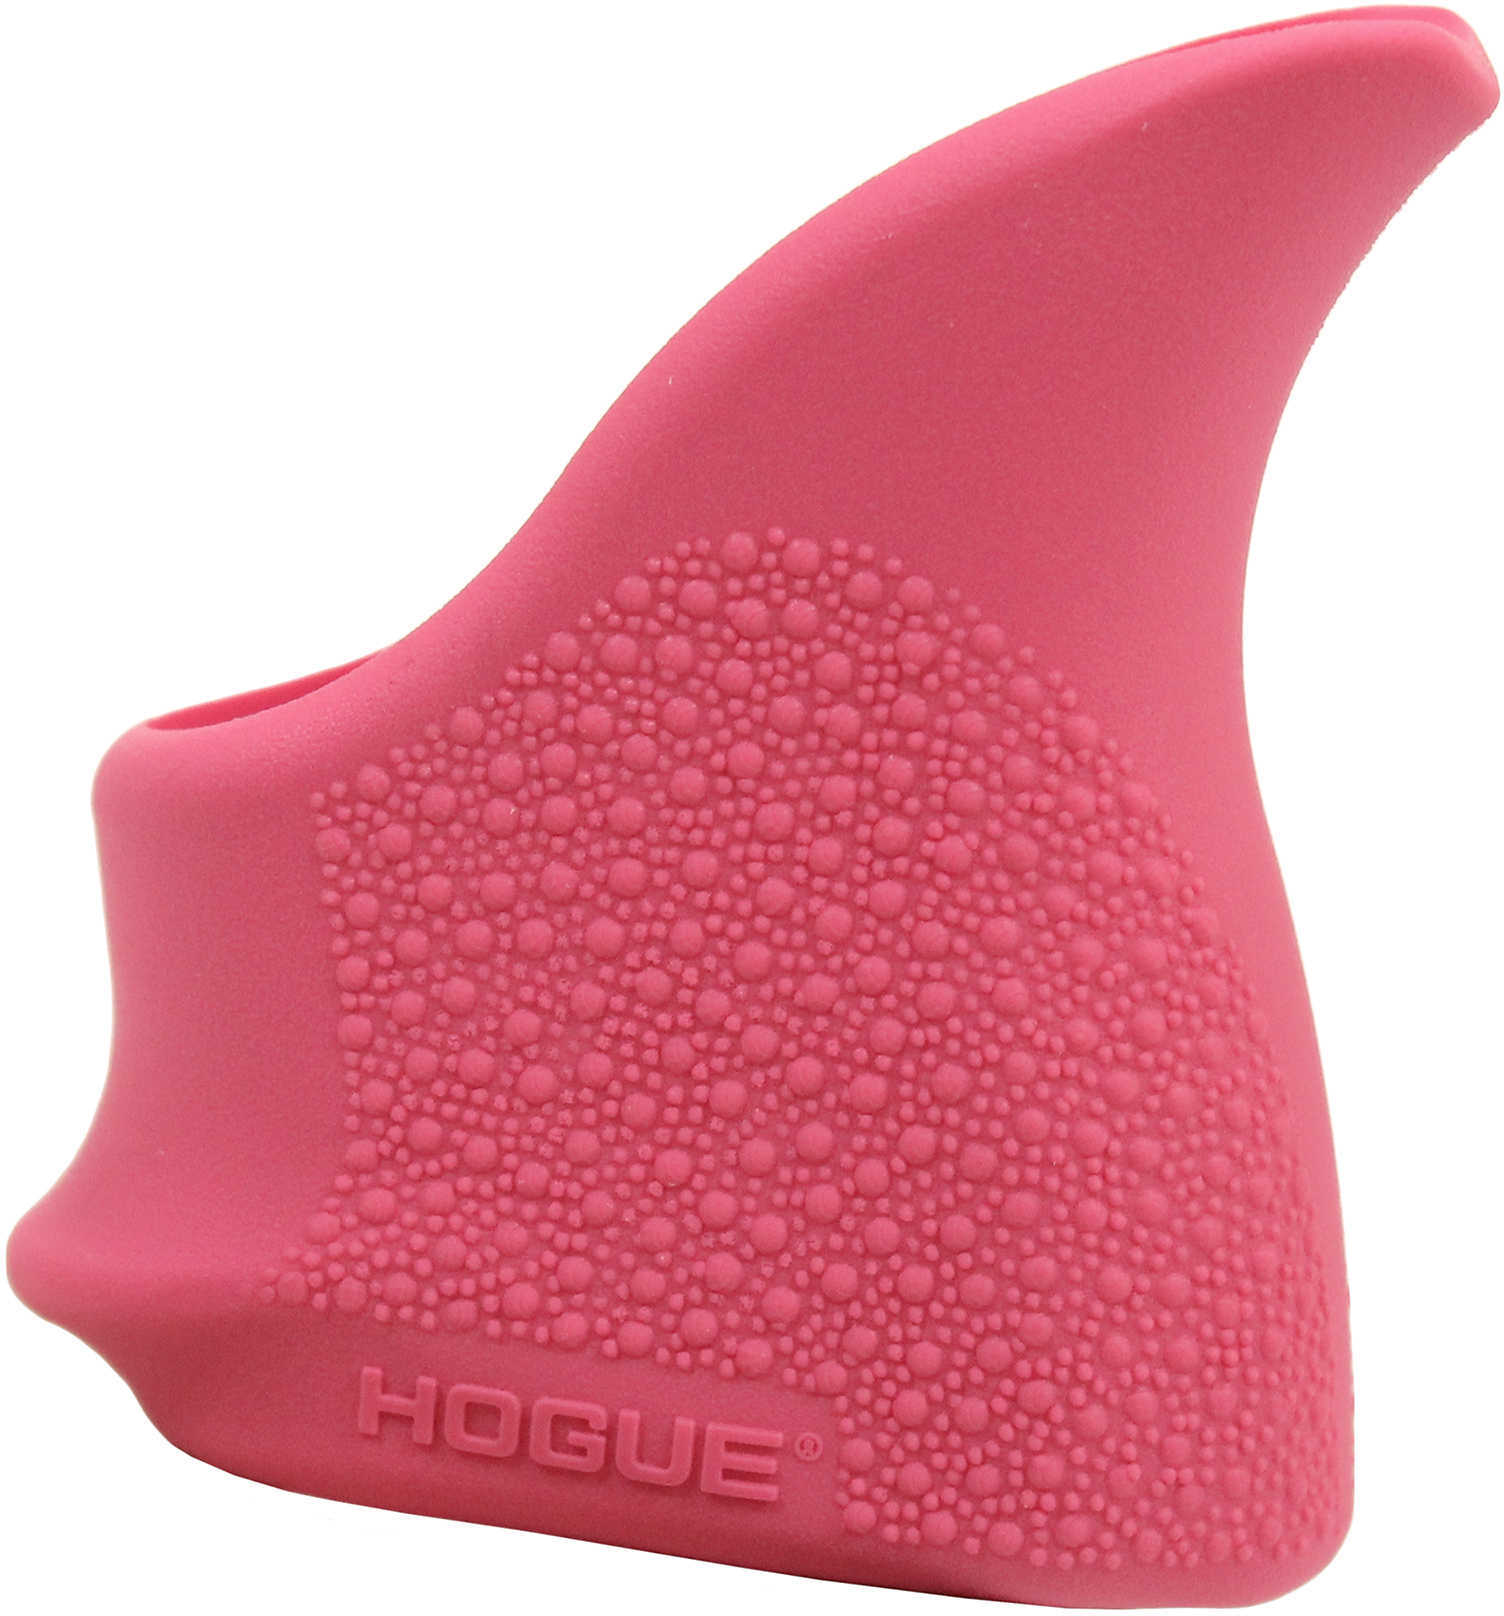 Hogue HandAll Beavertail Grip Smith & Wesson Bodyguard 380/Taurus TCP and Spectrum, Pink Md: 18507